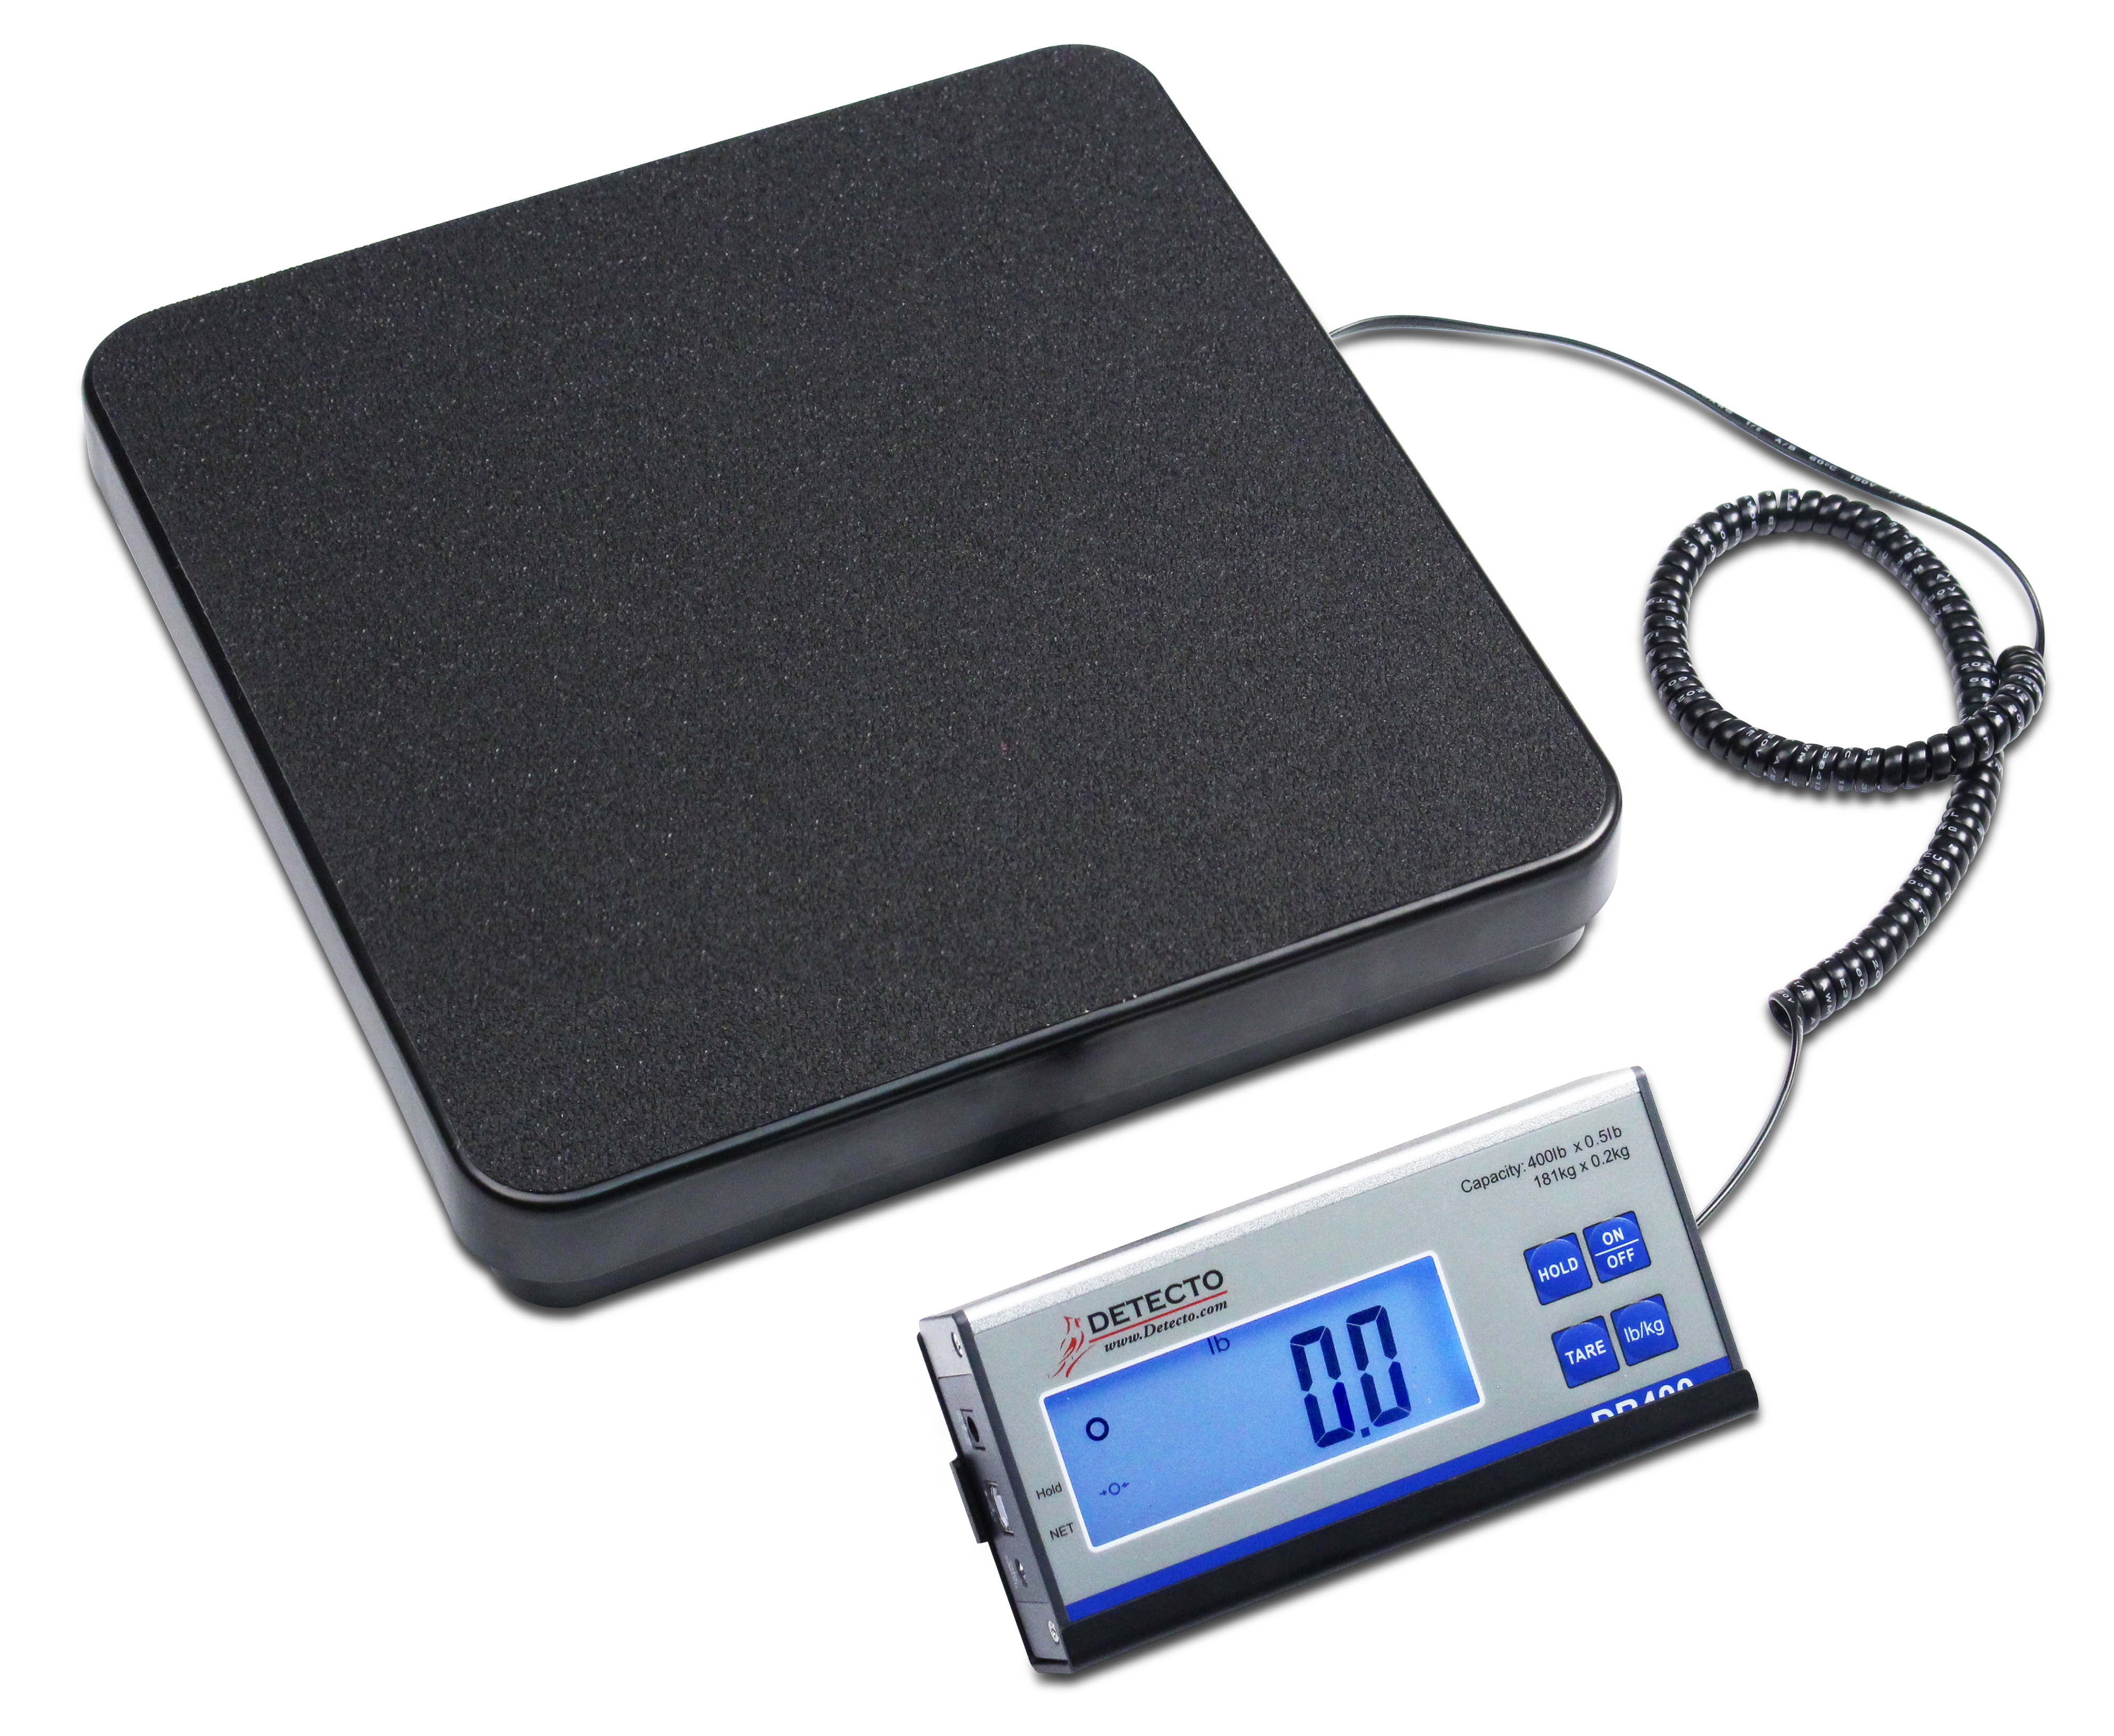 Cardinal Detecto 854F50P 500 lb. Portable Mechanical Floor Scale, Legal for  Trade